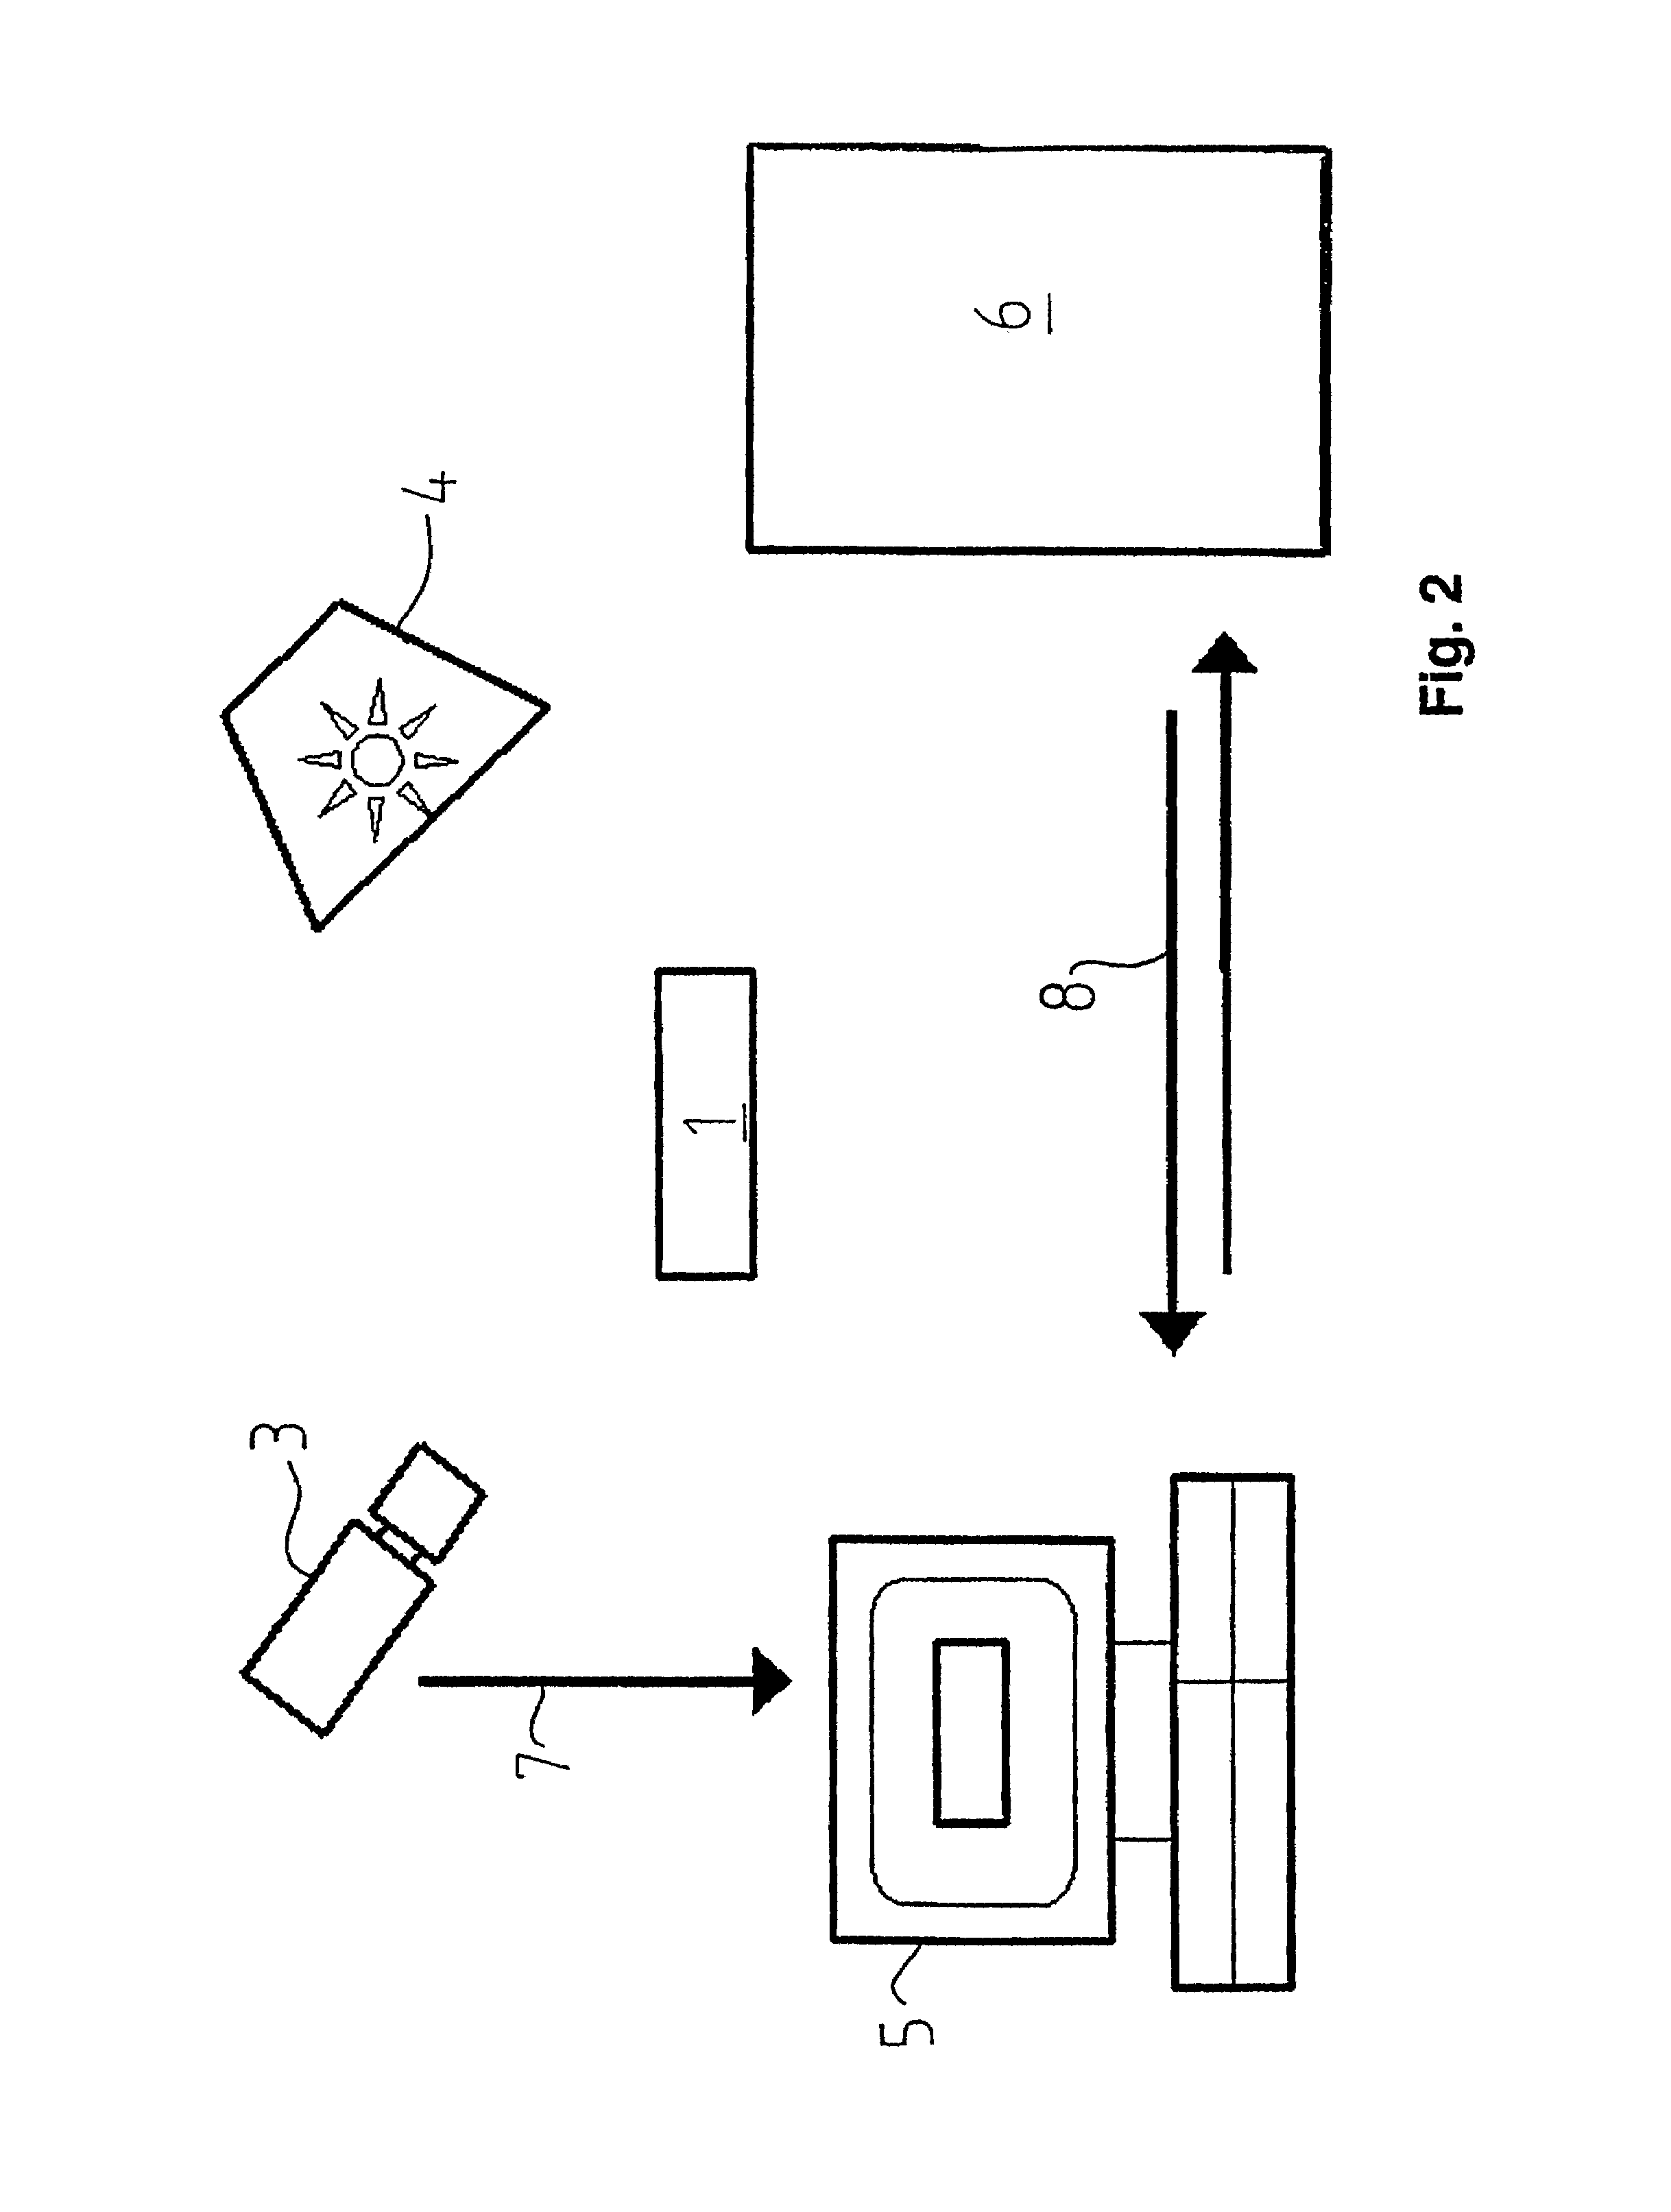 Method and apparatus for quality control in the manufacture of foundry cores or core packets